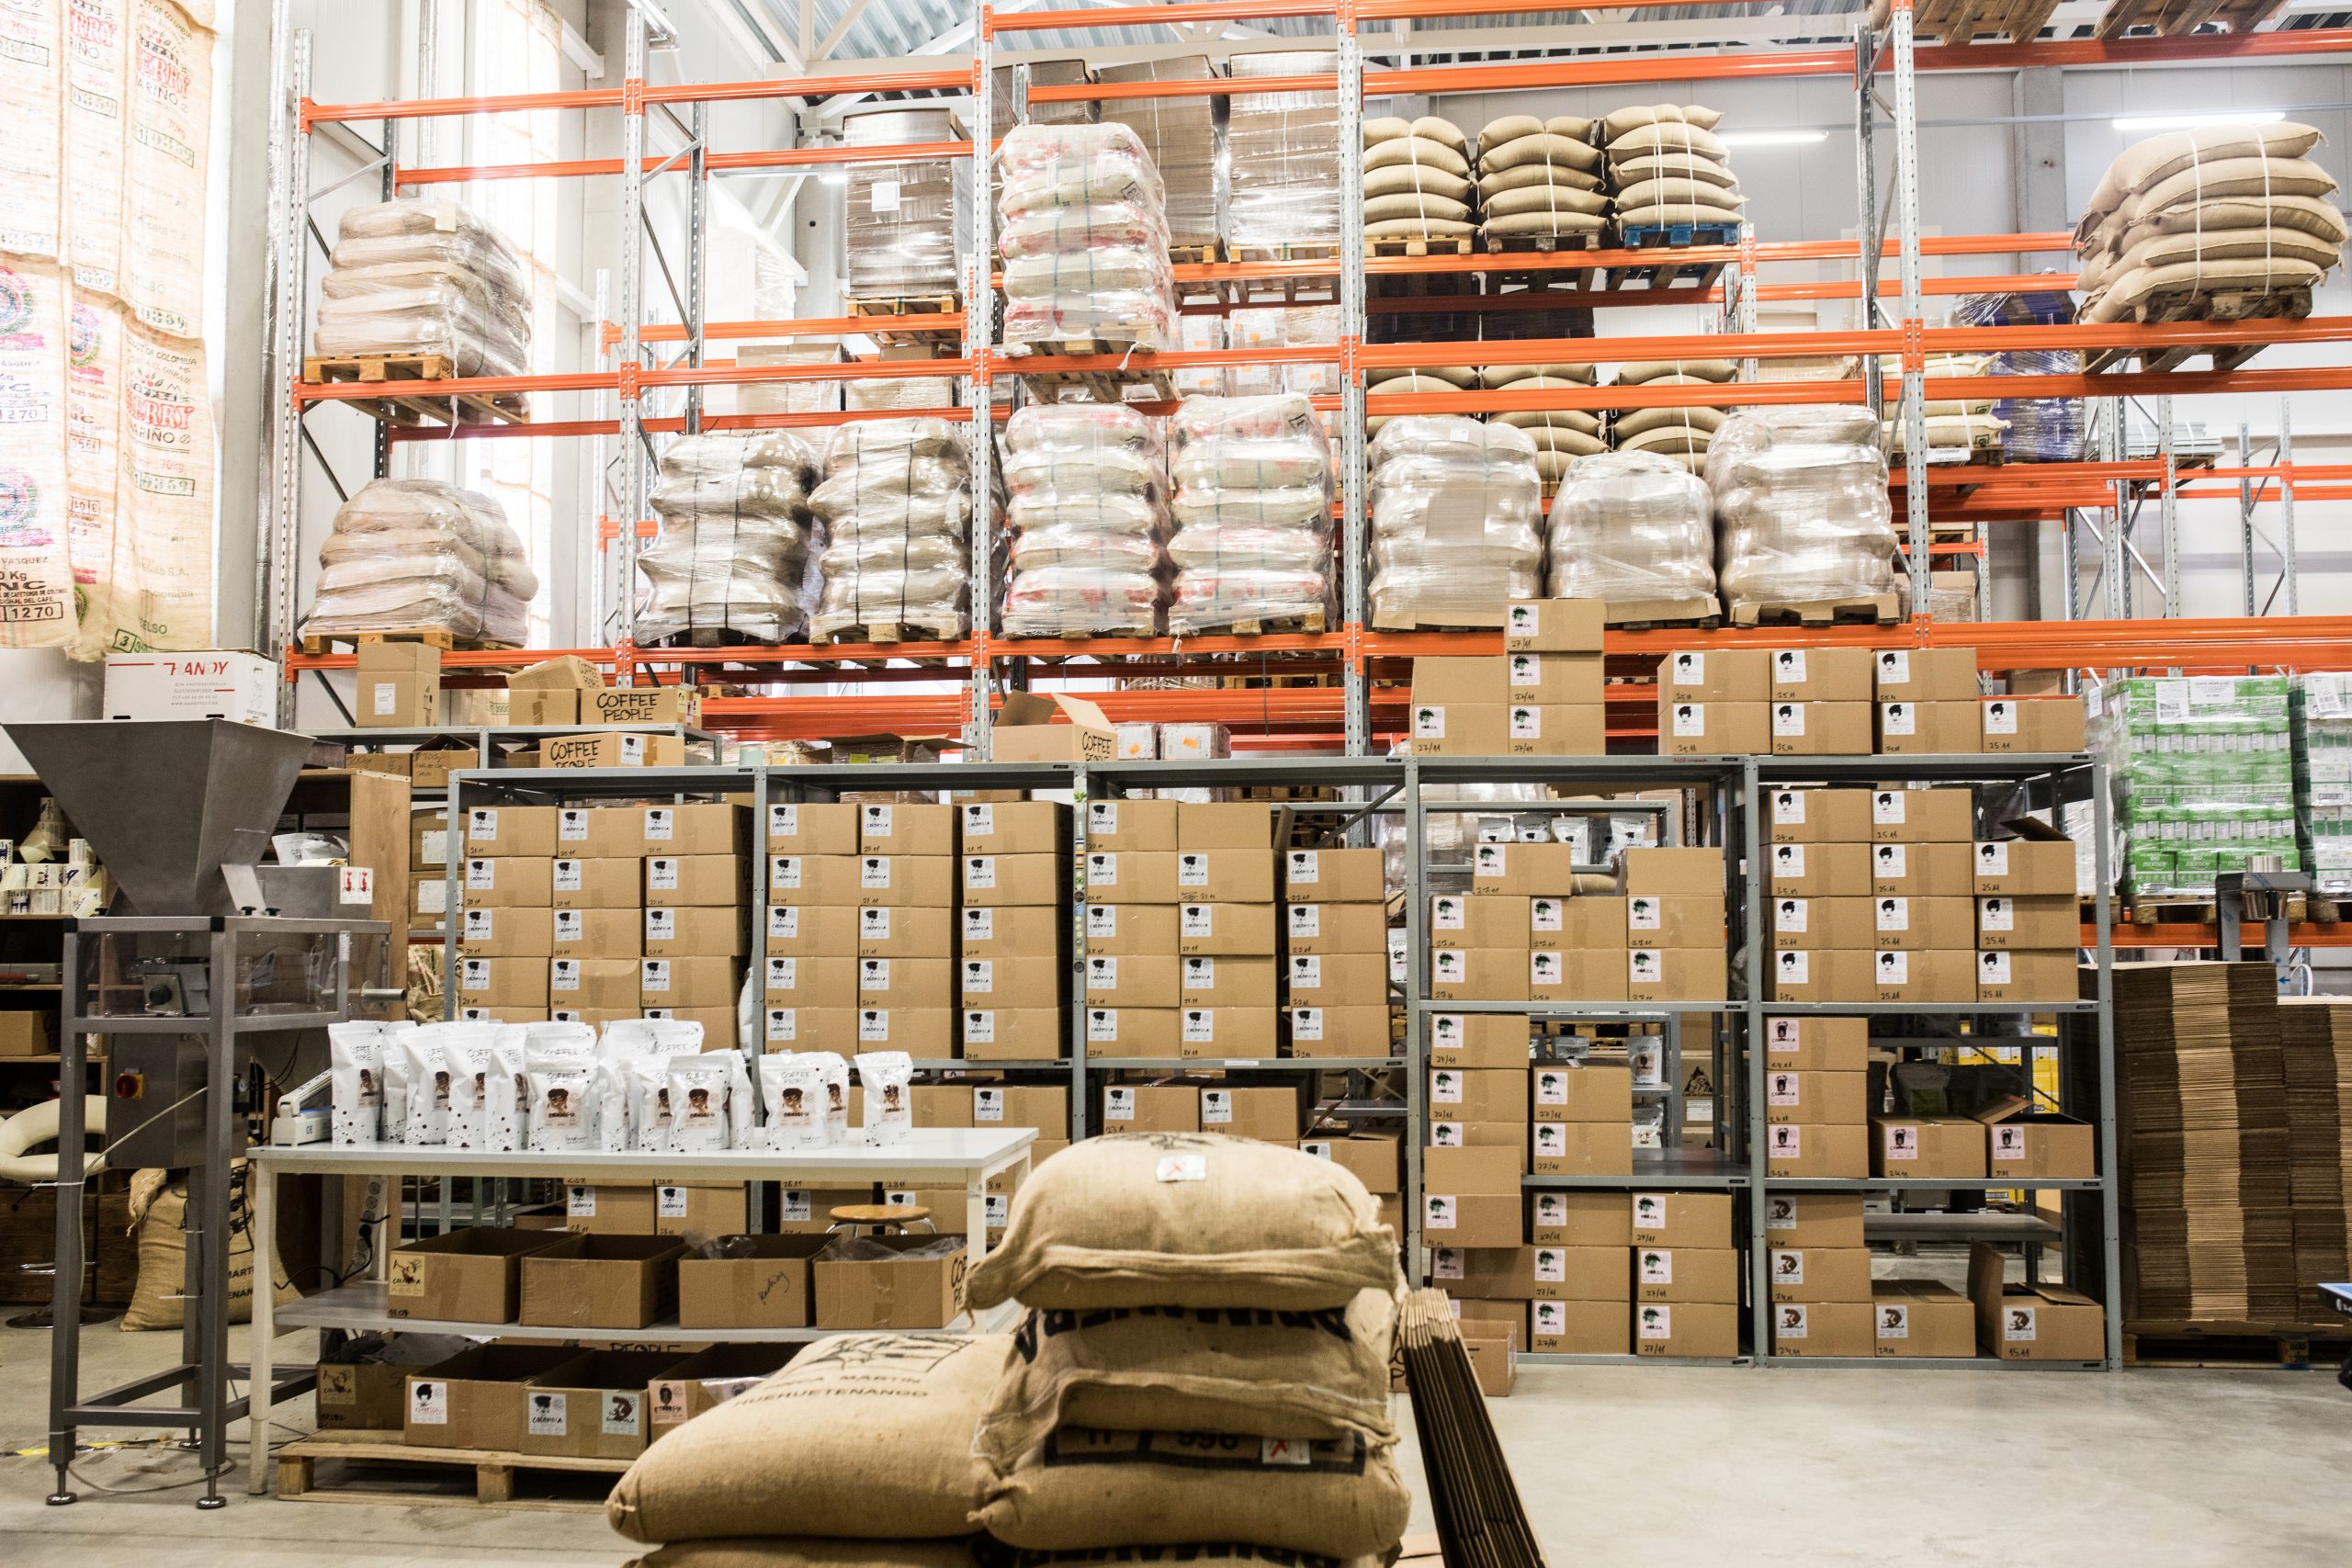 A stocktake is essential for performing audits and discovering issues with your inventory.